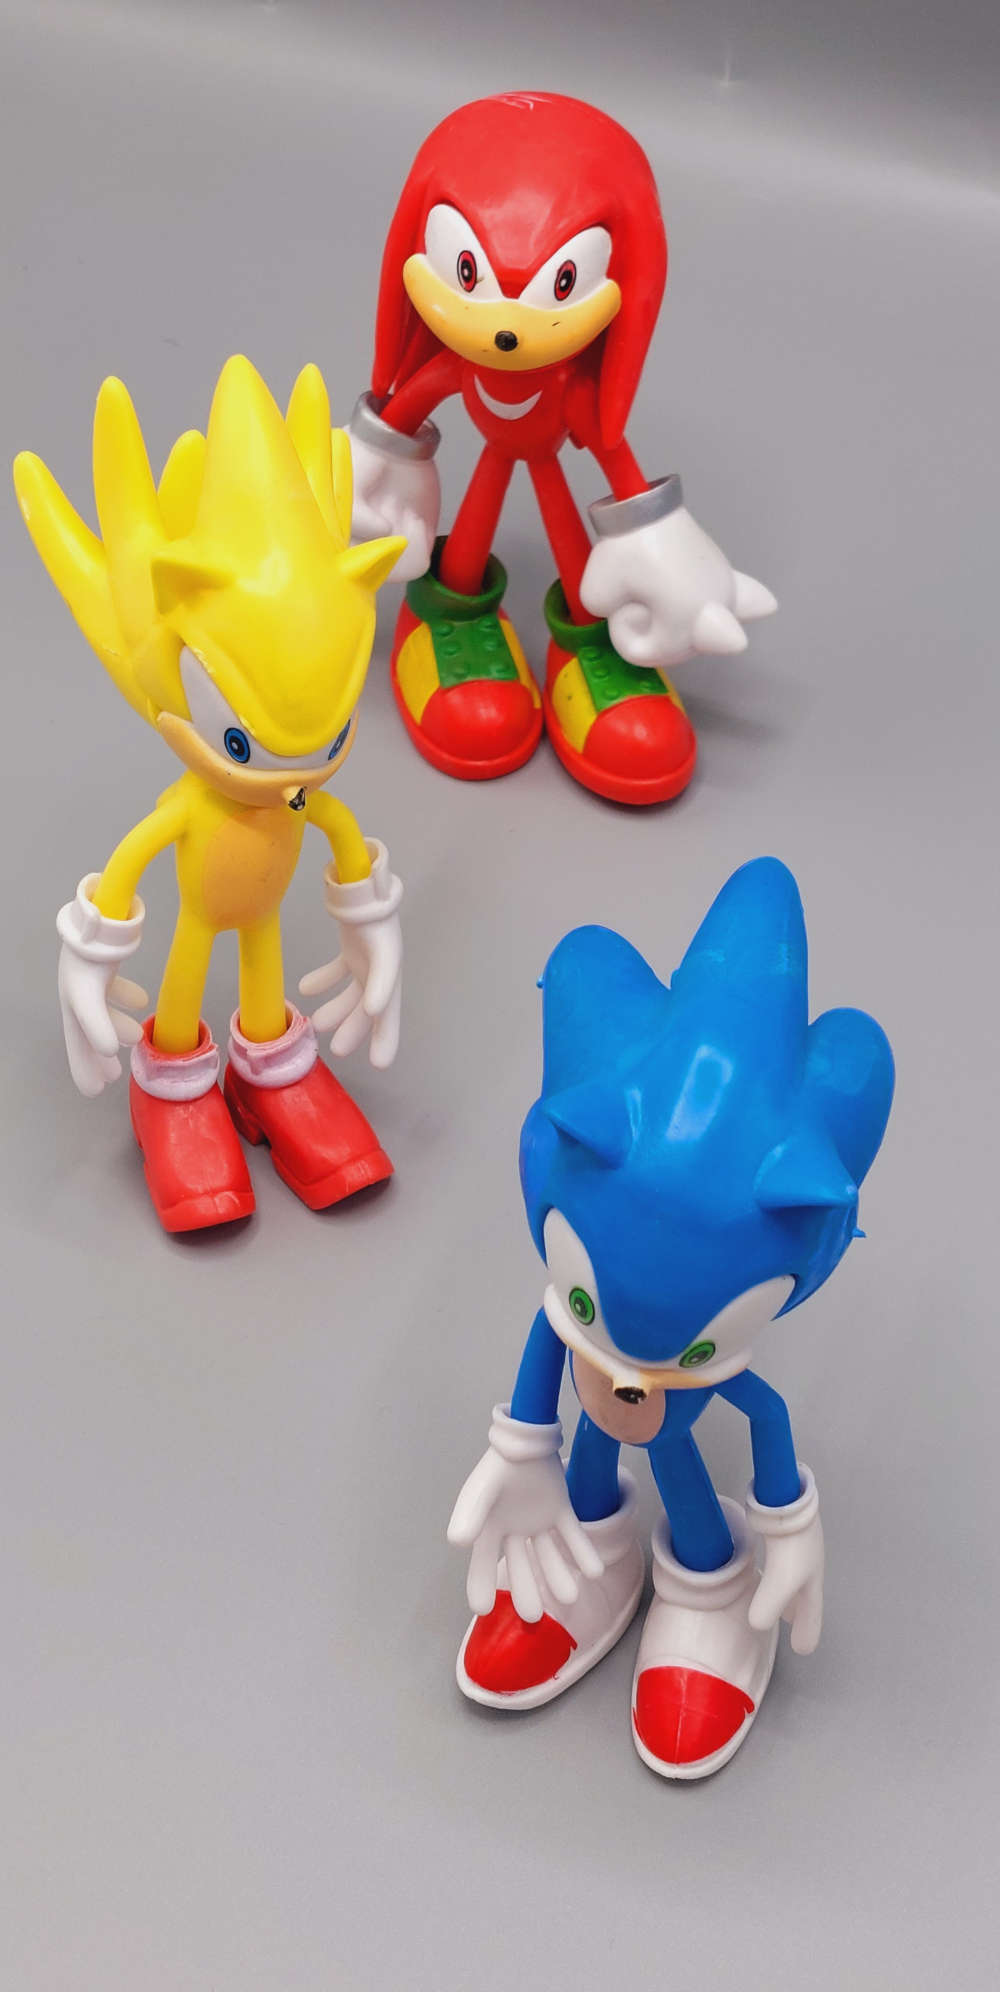 Sonic The Hedgehog Action Figures Toy Collection Play Set Of 6 | Sonic Theme Birthday Party Cake Decoration PVC Cartoon Characters